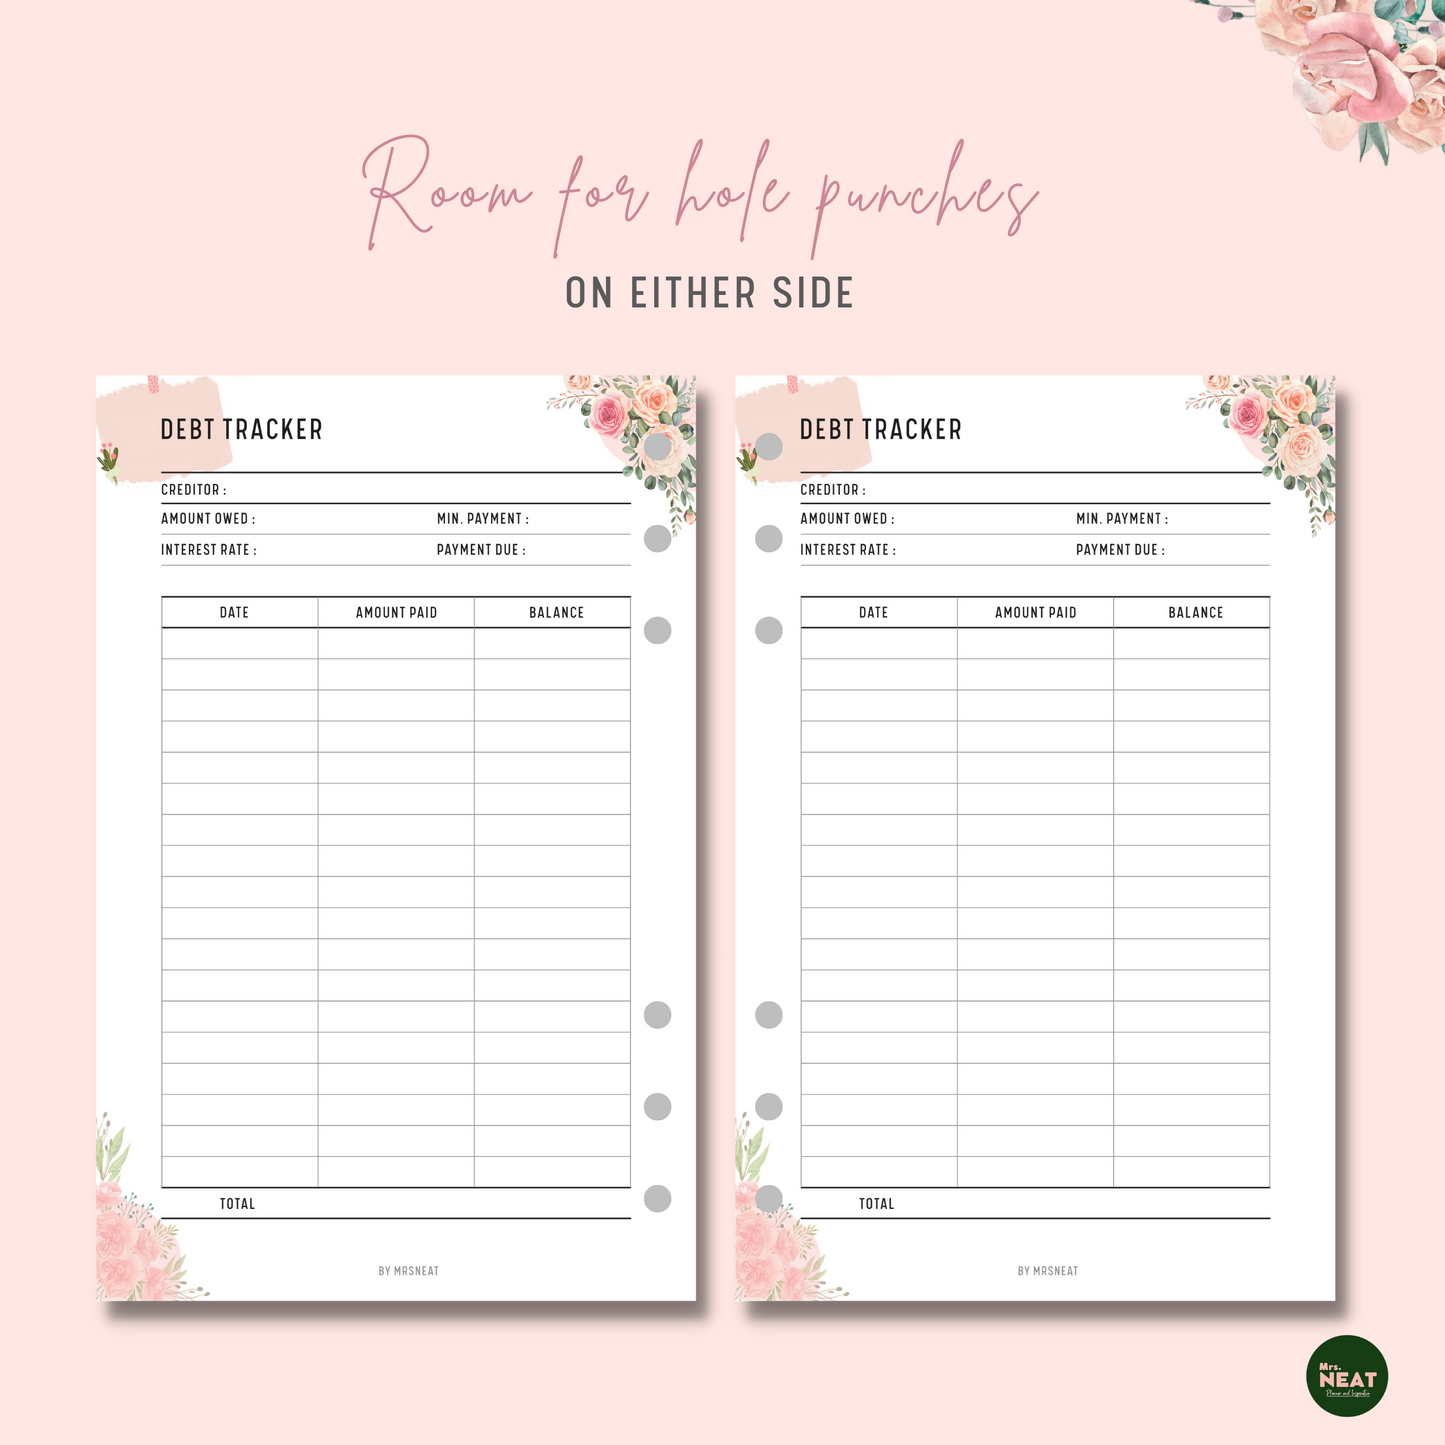 Floral Debt Payment Tracker Planner with room for hole punches on either side